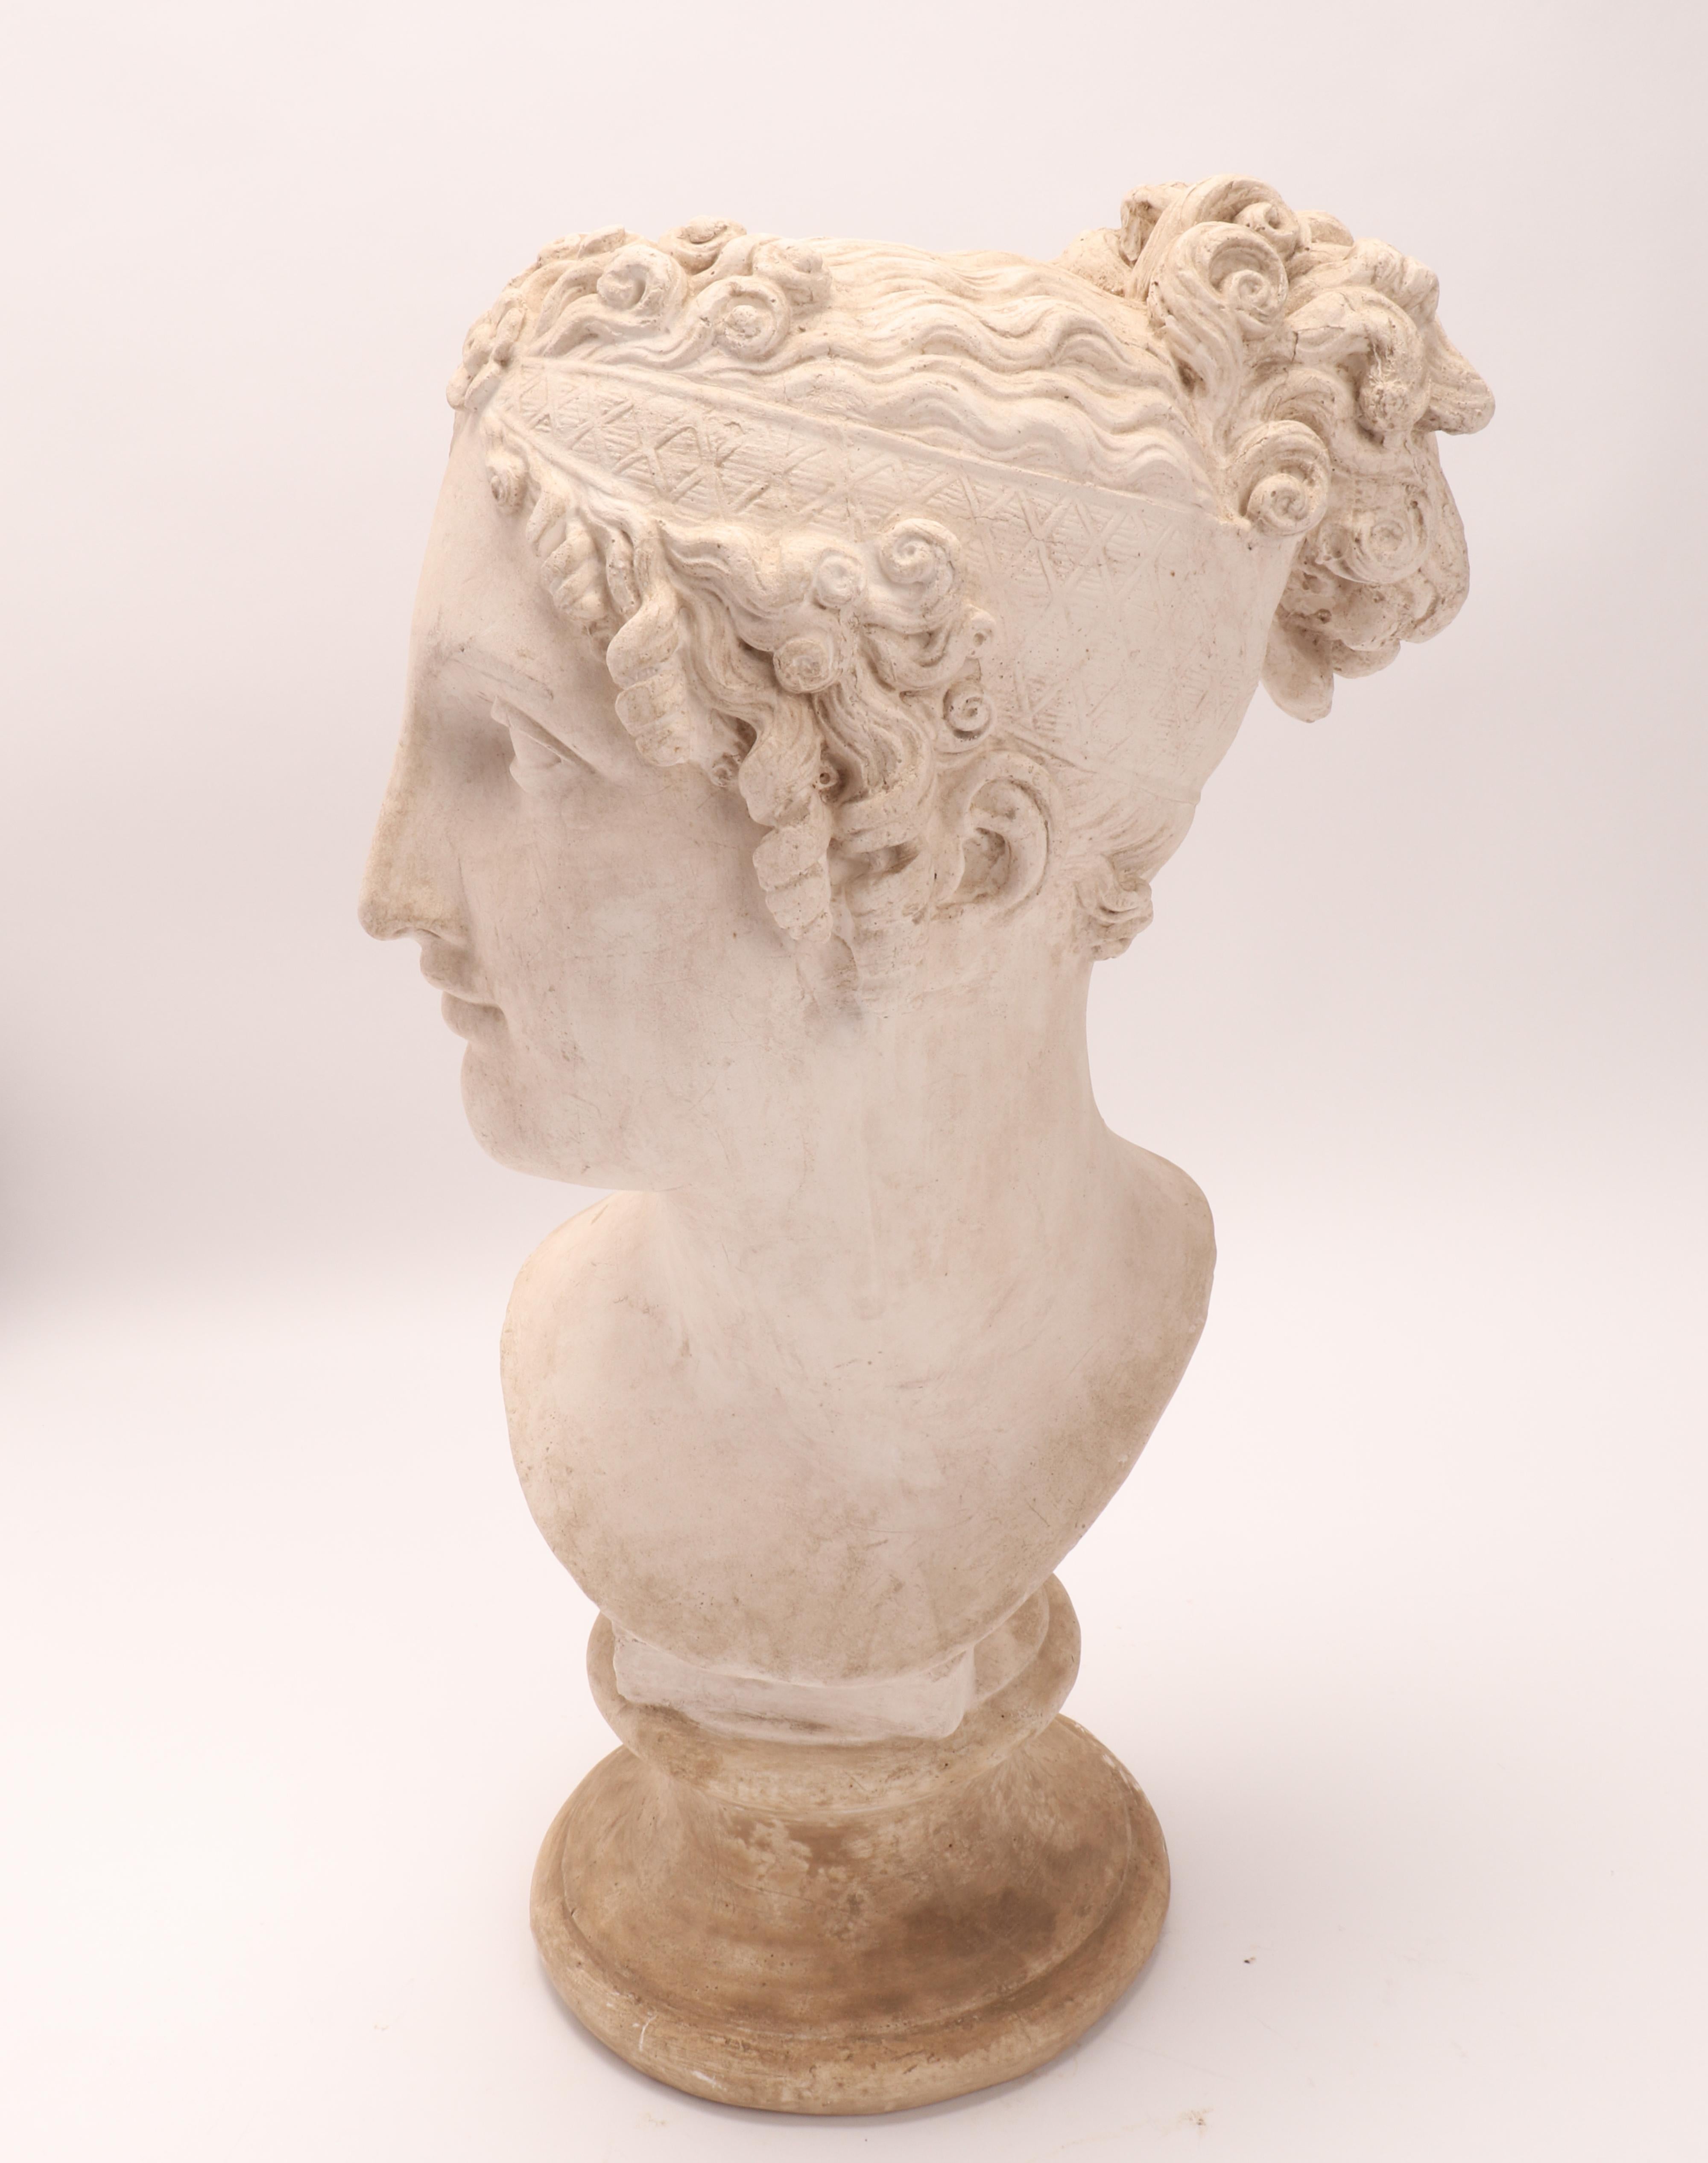 Above the plaster base there is a plaster cast of a woman's head, Neoclassical portrait. A cast for the teaching drawing in the academy. Italy circa 1890.